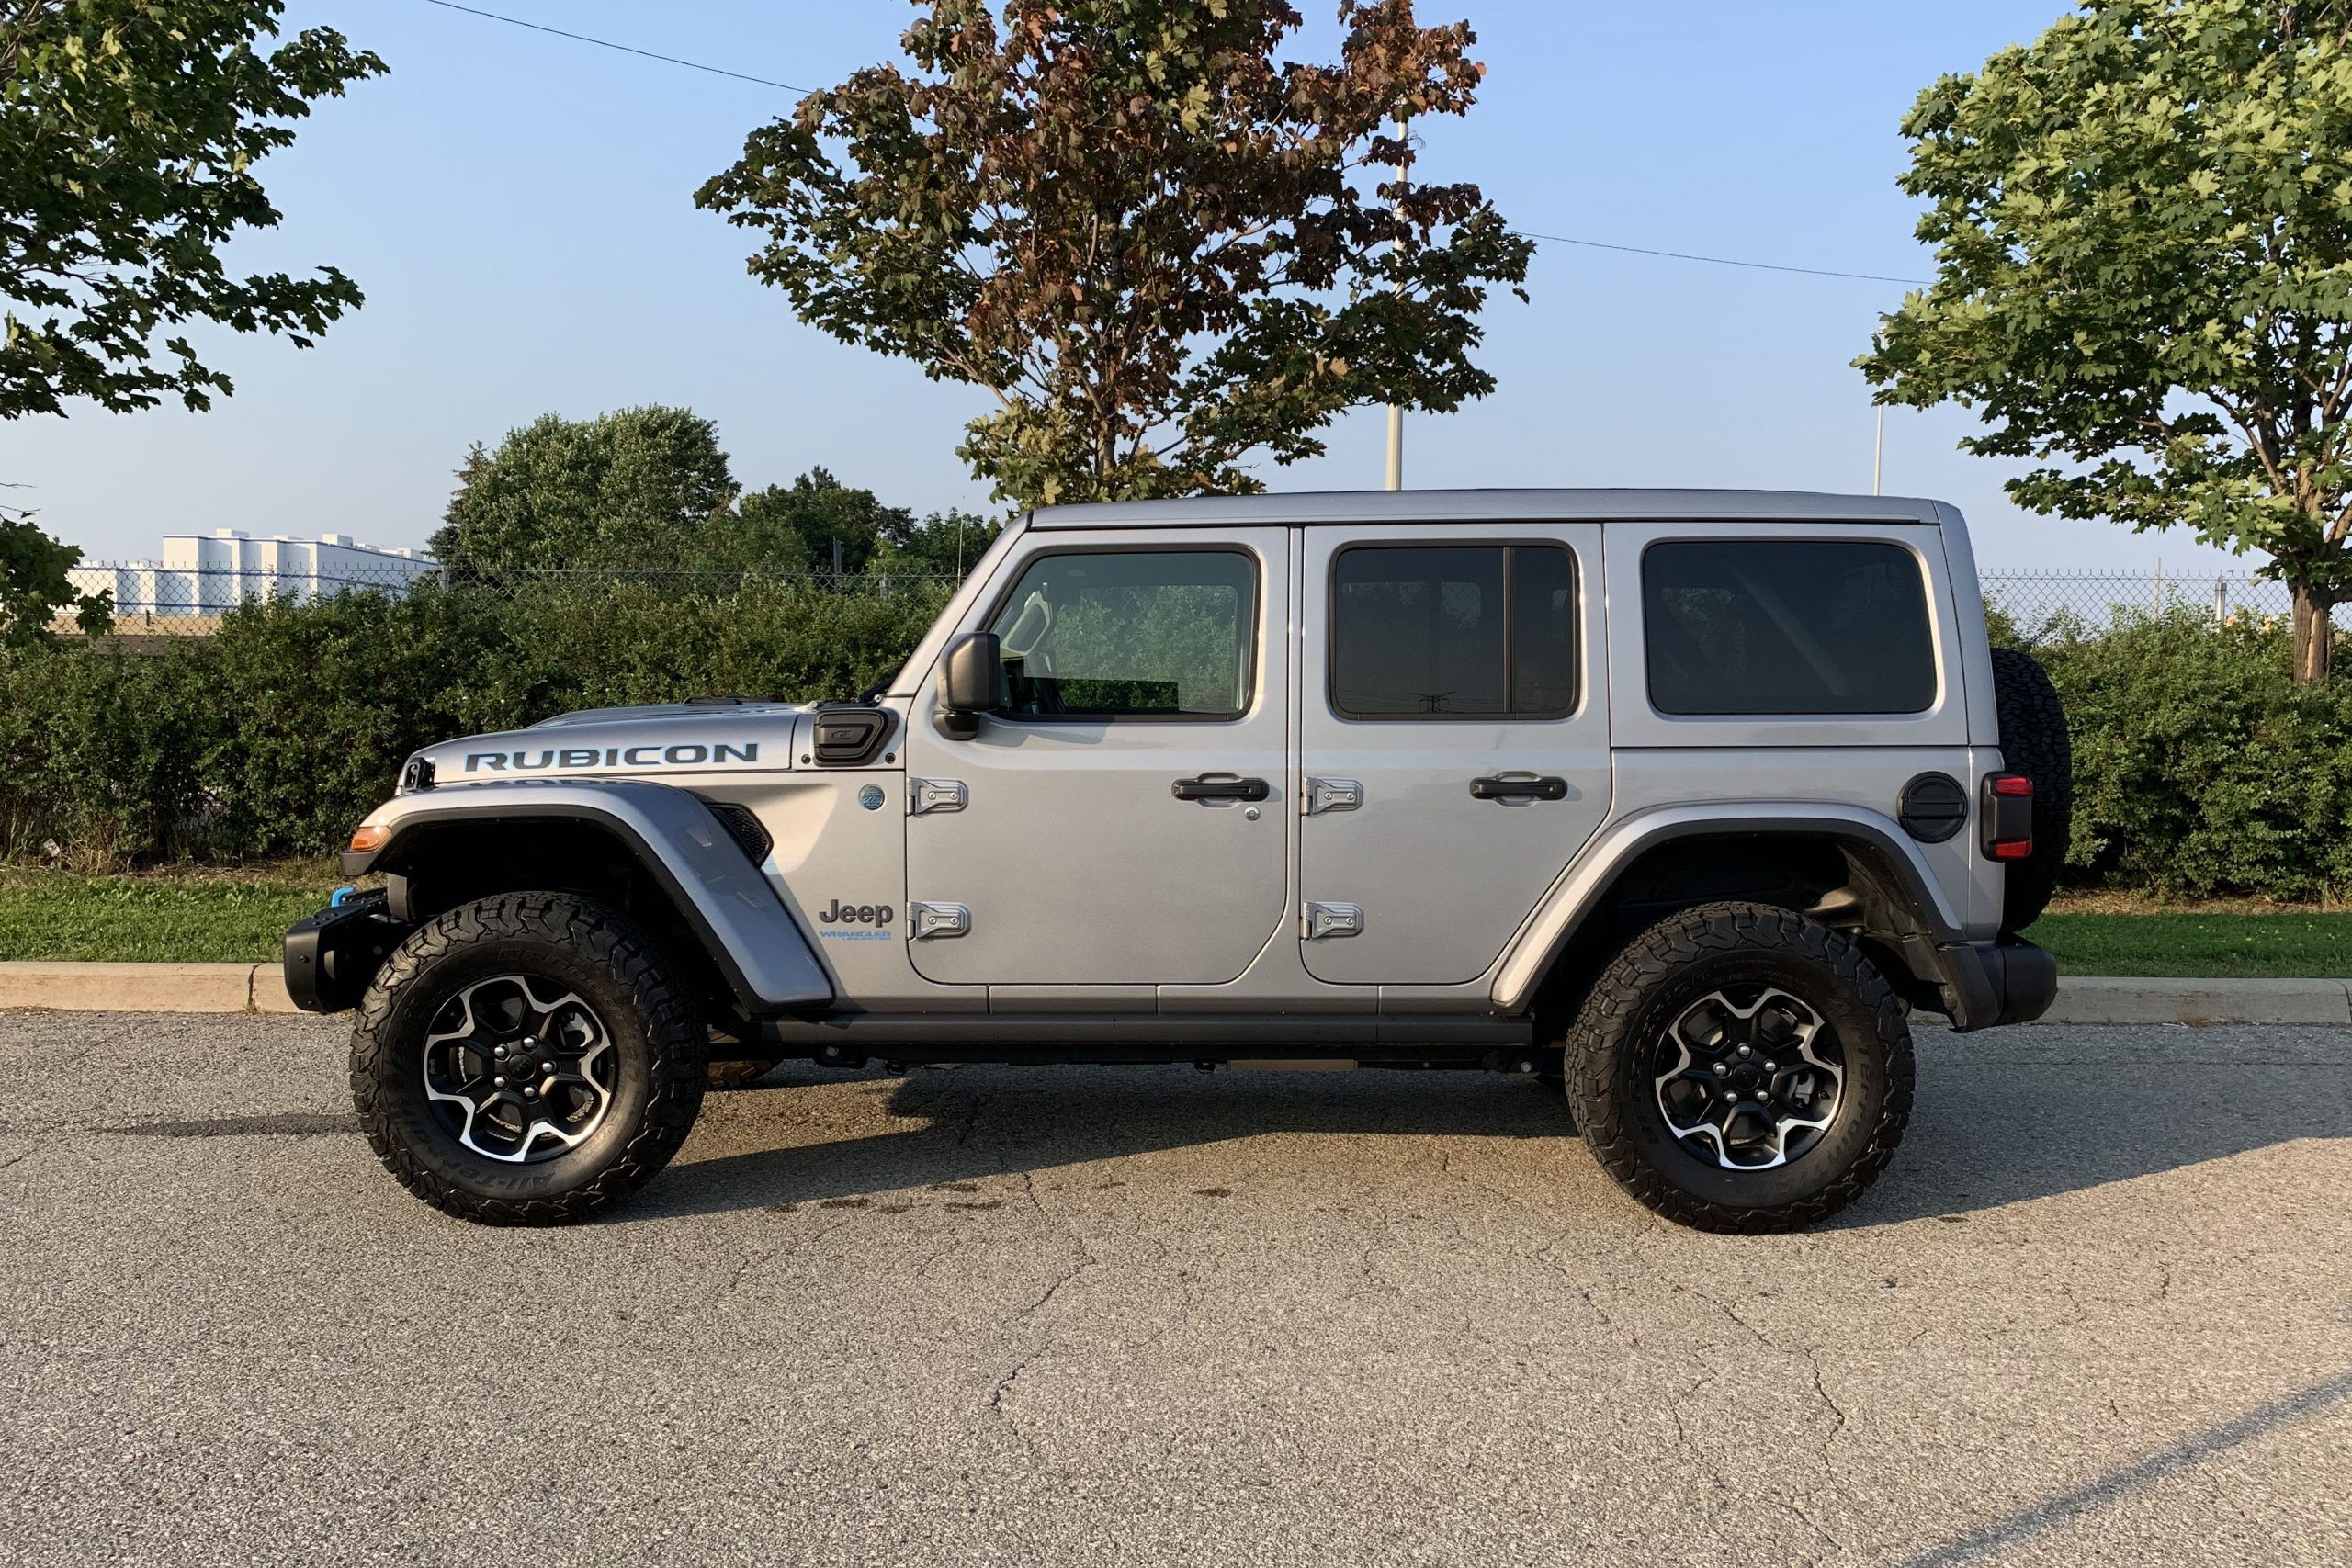 2018 Jeep Wrangler Unlimited Sahara Quick Spin Review - Autoblog